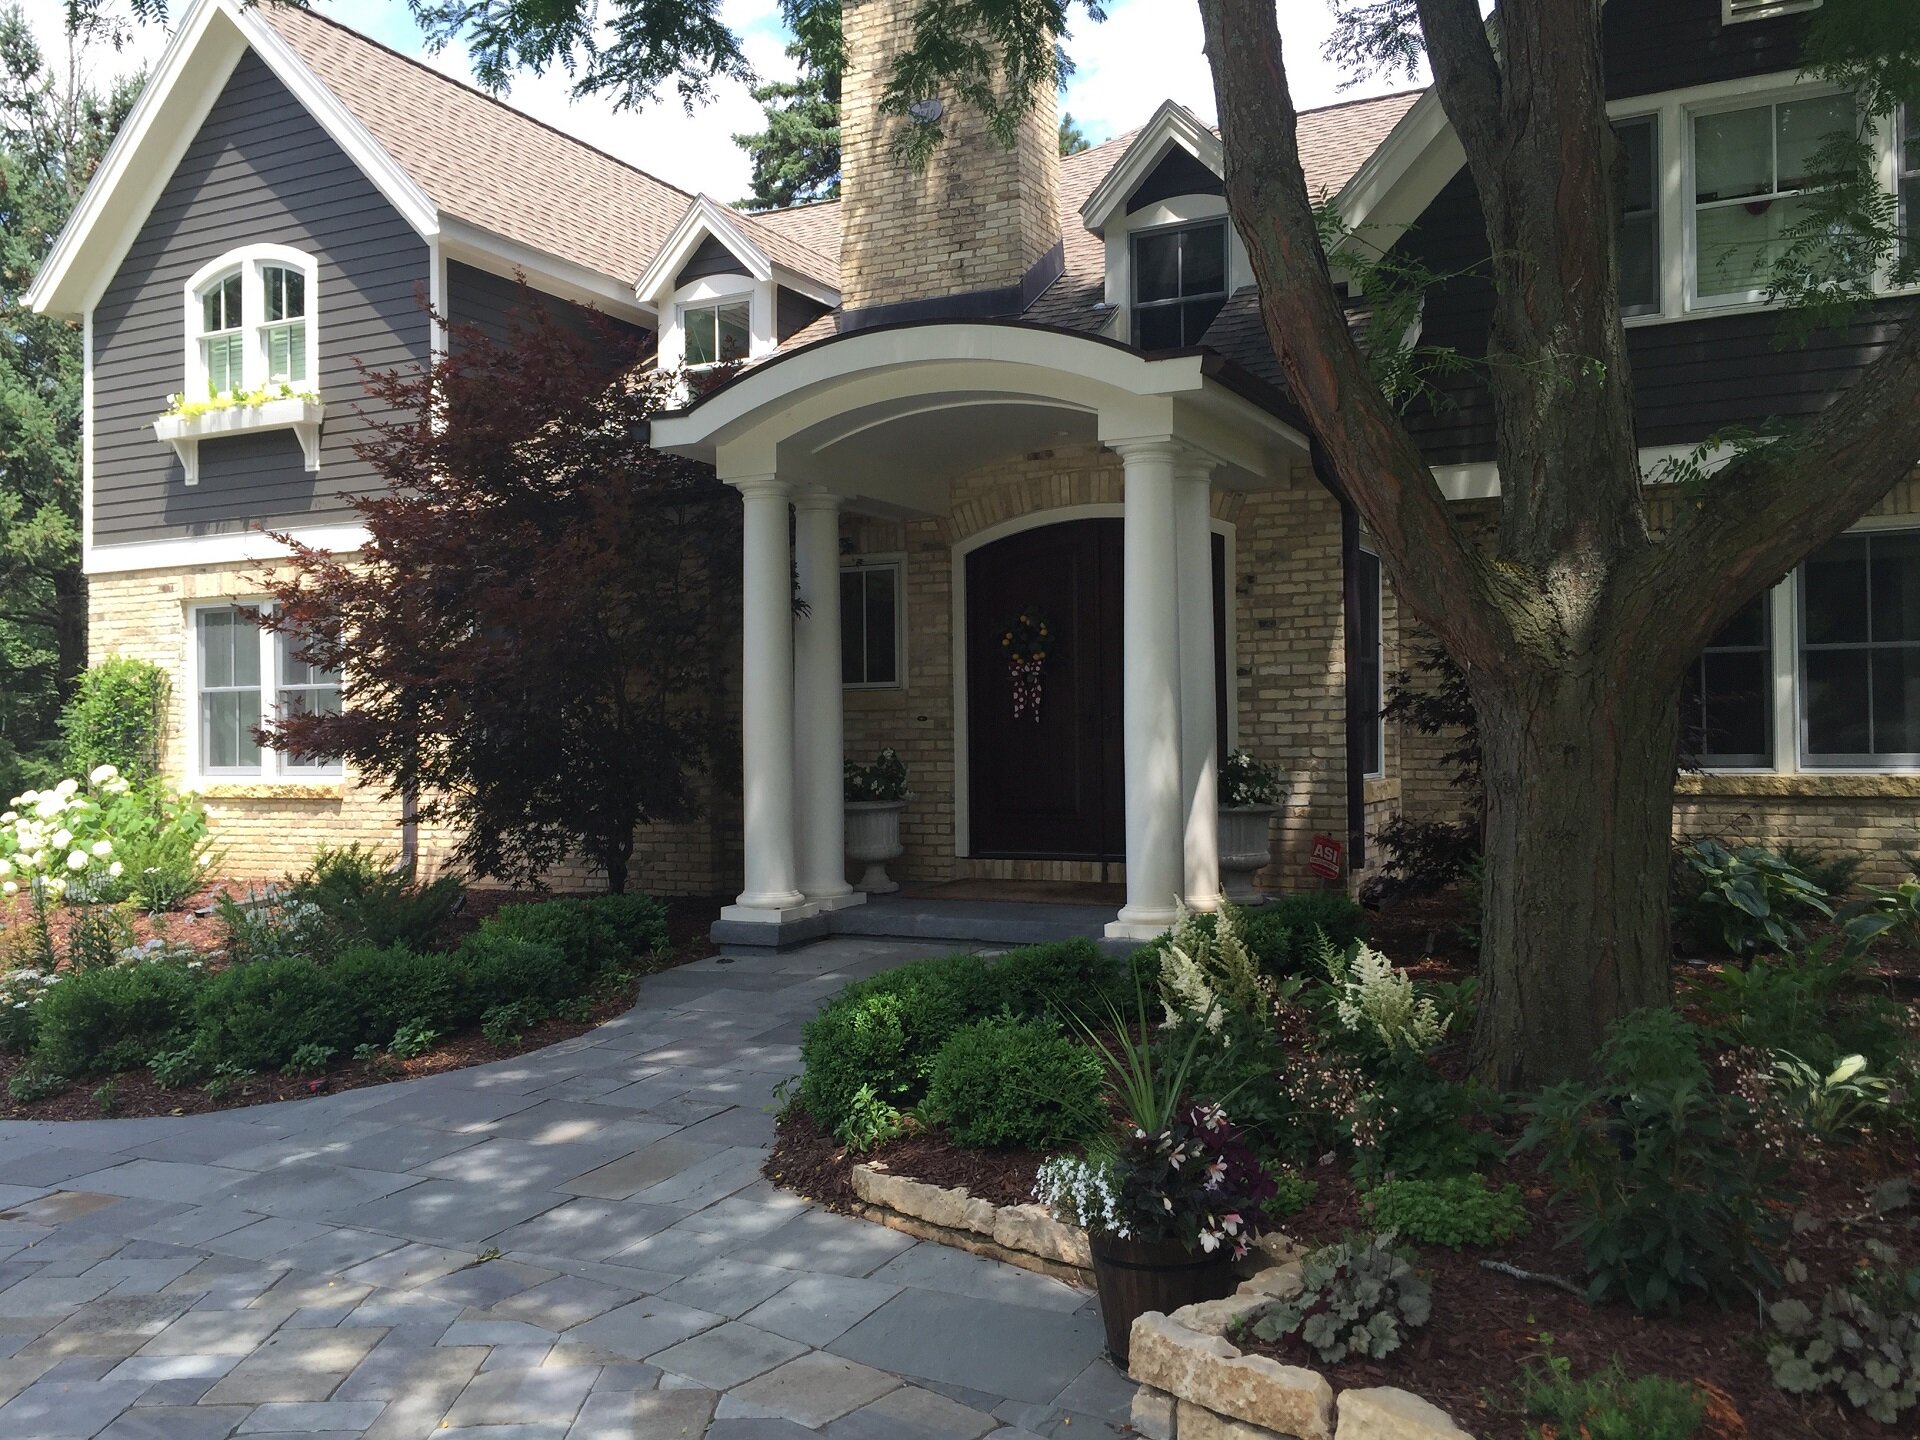 CURB APPEAL FOR YOUR HOME